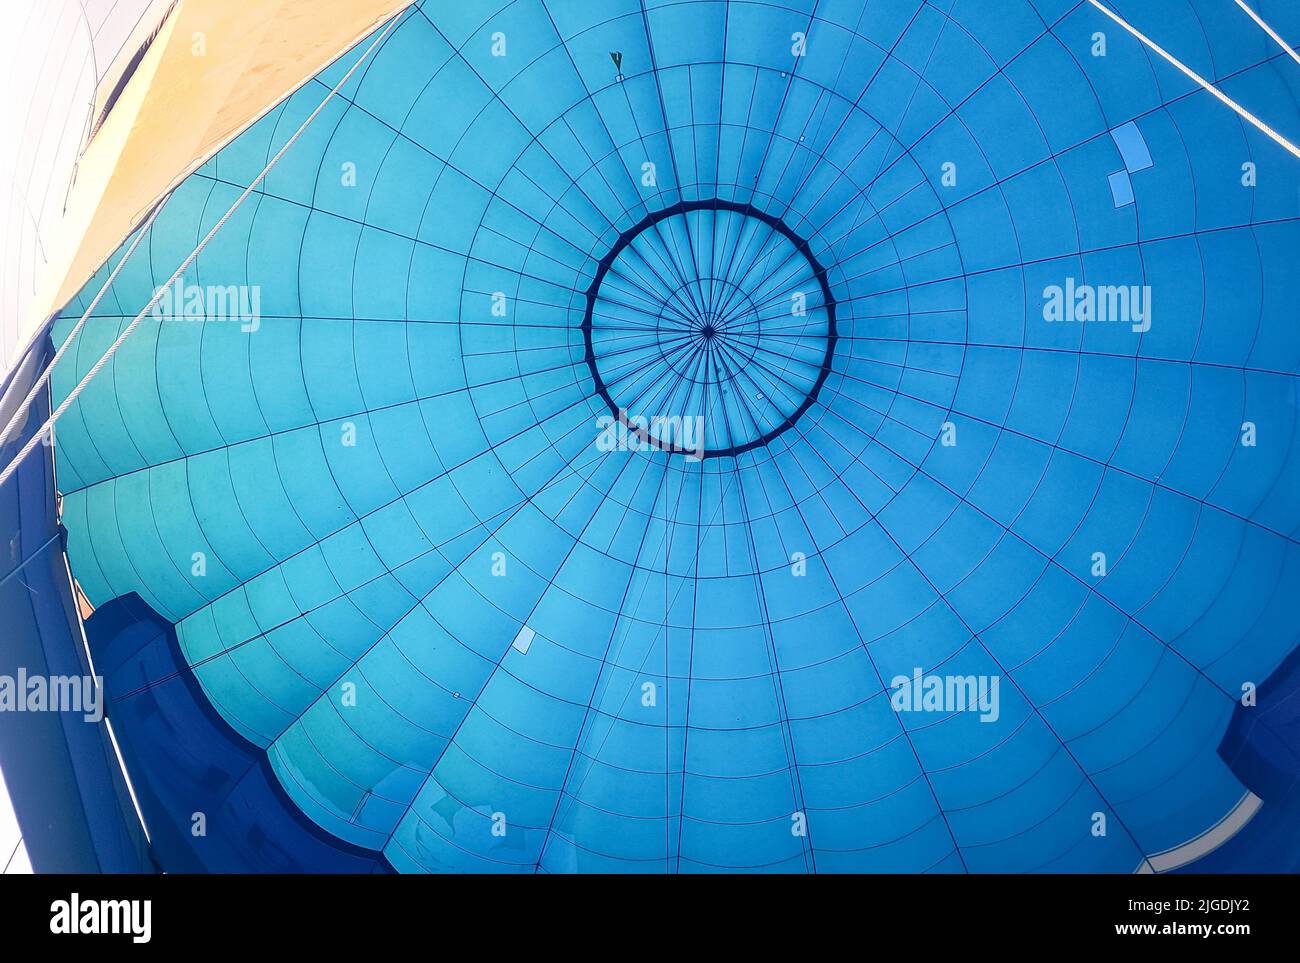 Hot air balloon from the inside. Blue balloon fabric with ropes. A moment before a flight when you're looking up. Stock Photo